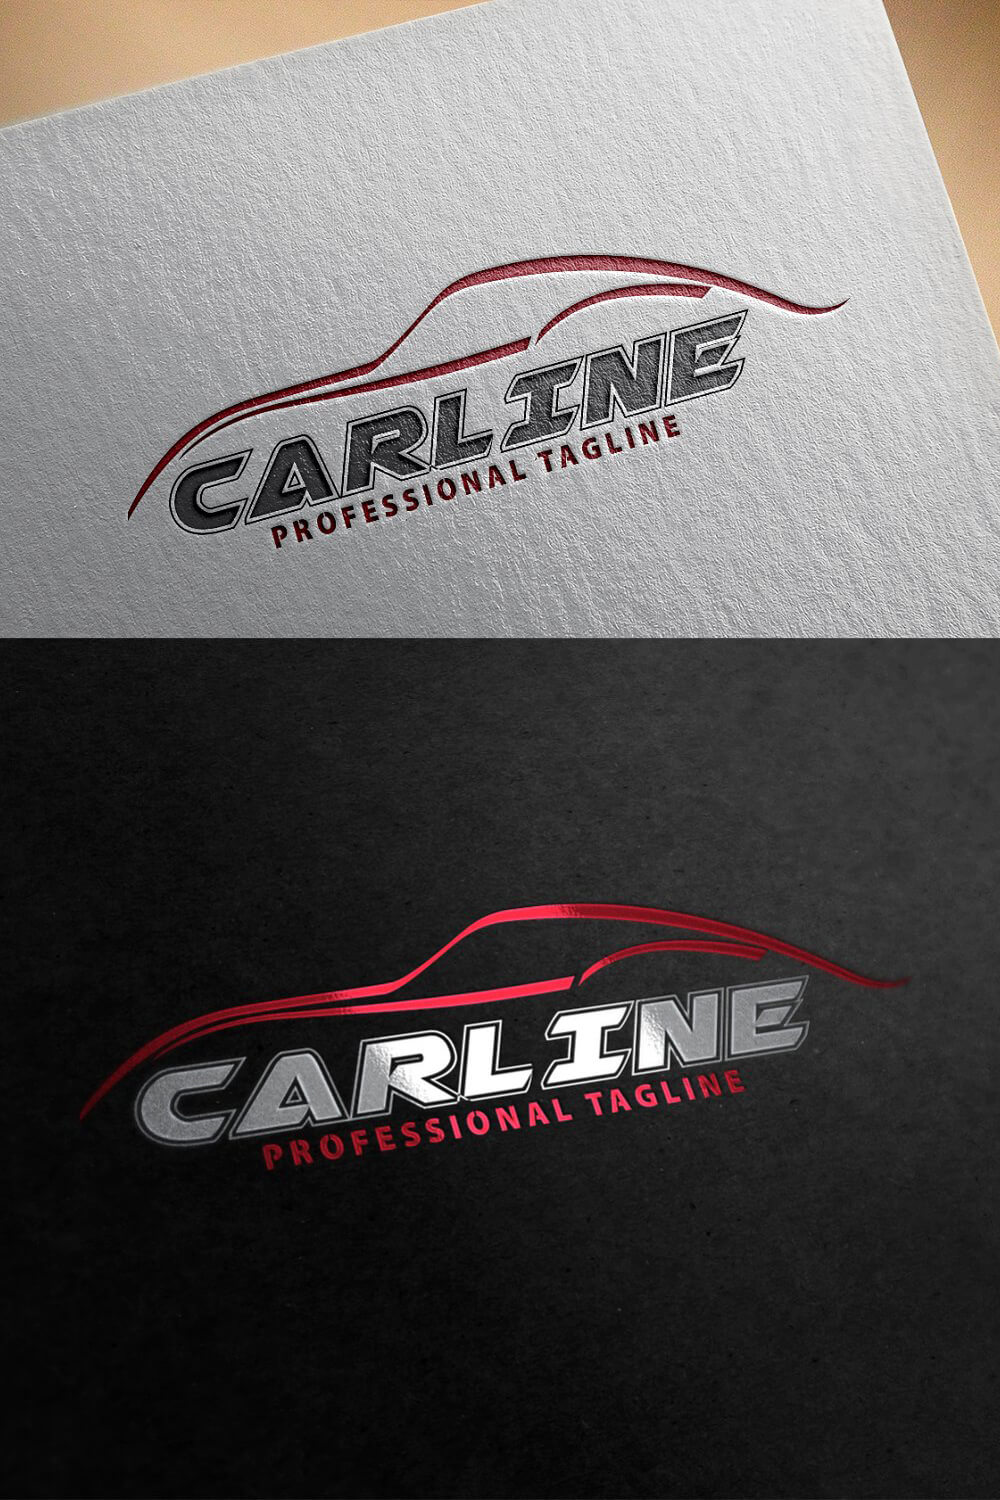 Two car line logos on a black and gray background.